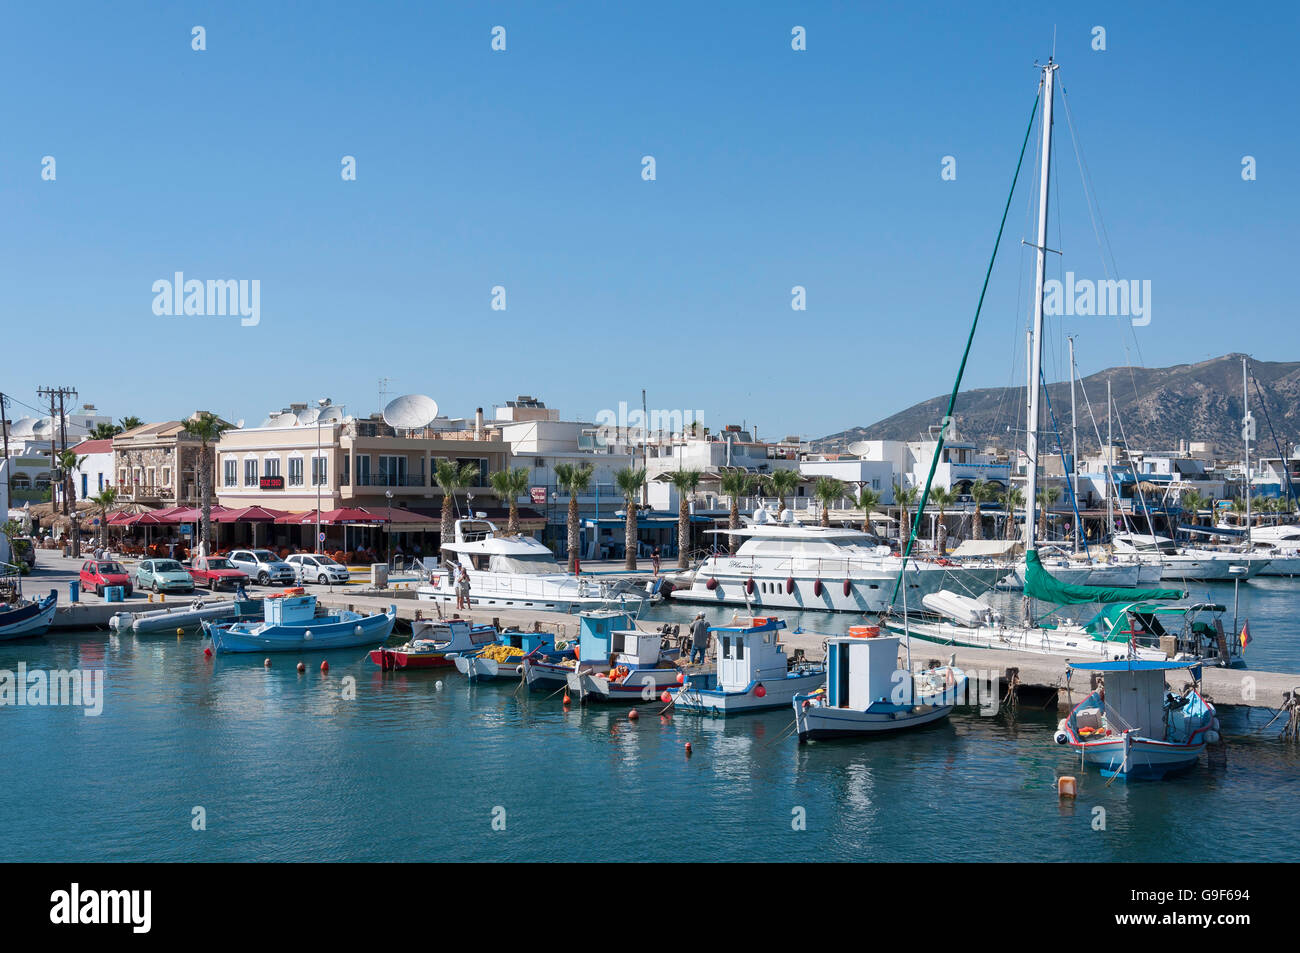 Traditional fishing boats in harbour, Kardamena, Kos (Cos), The Dodecanese, South Aegean Region, Greece Stock Photo